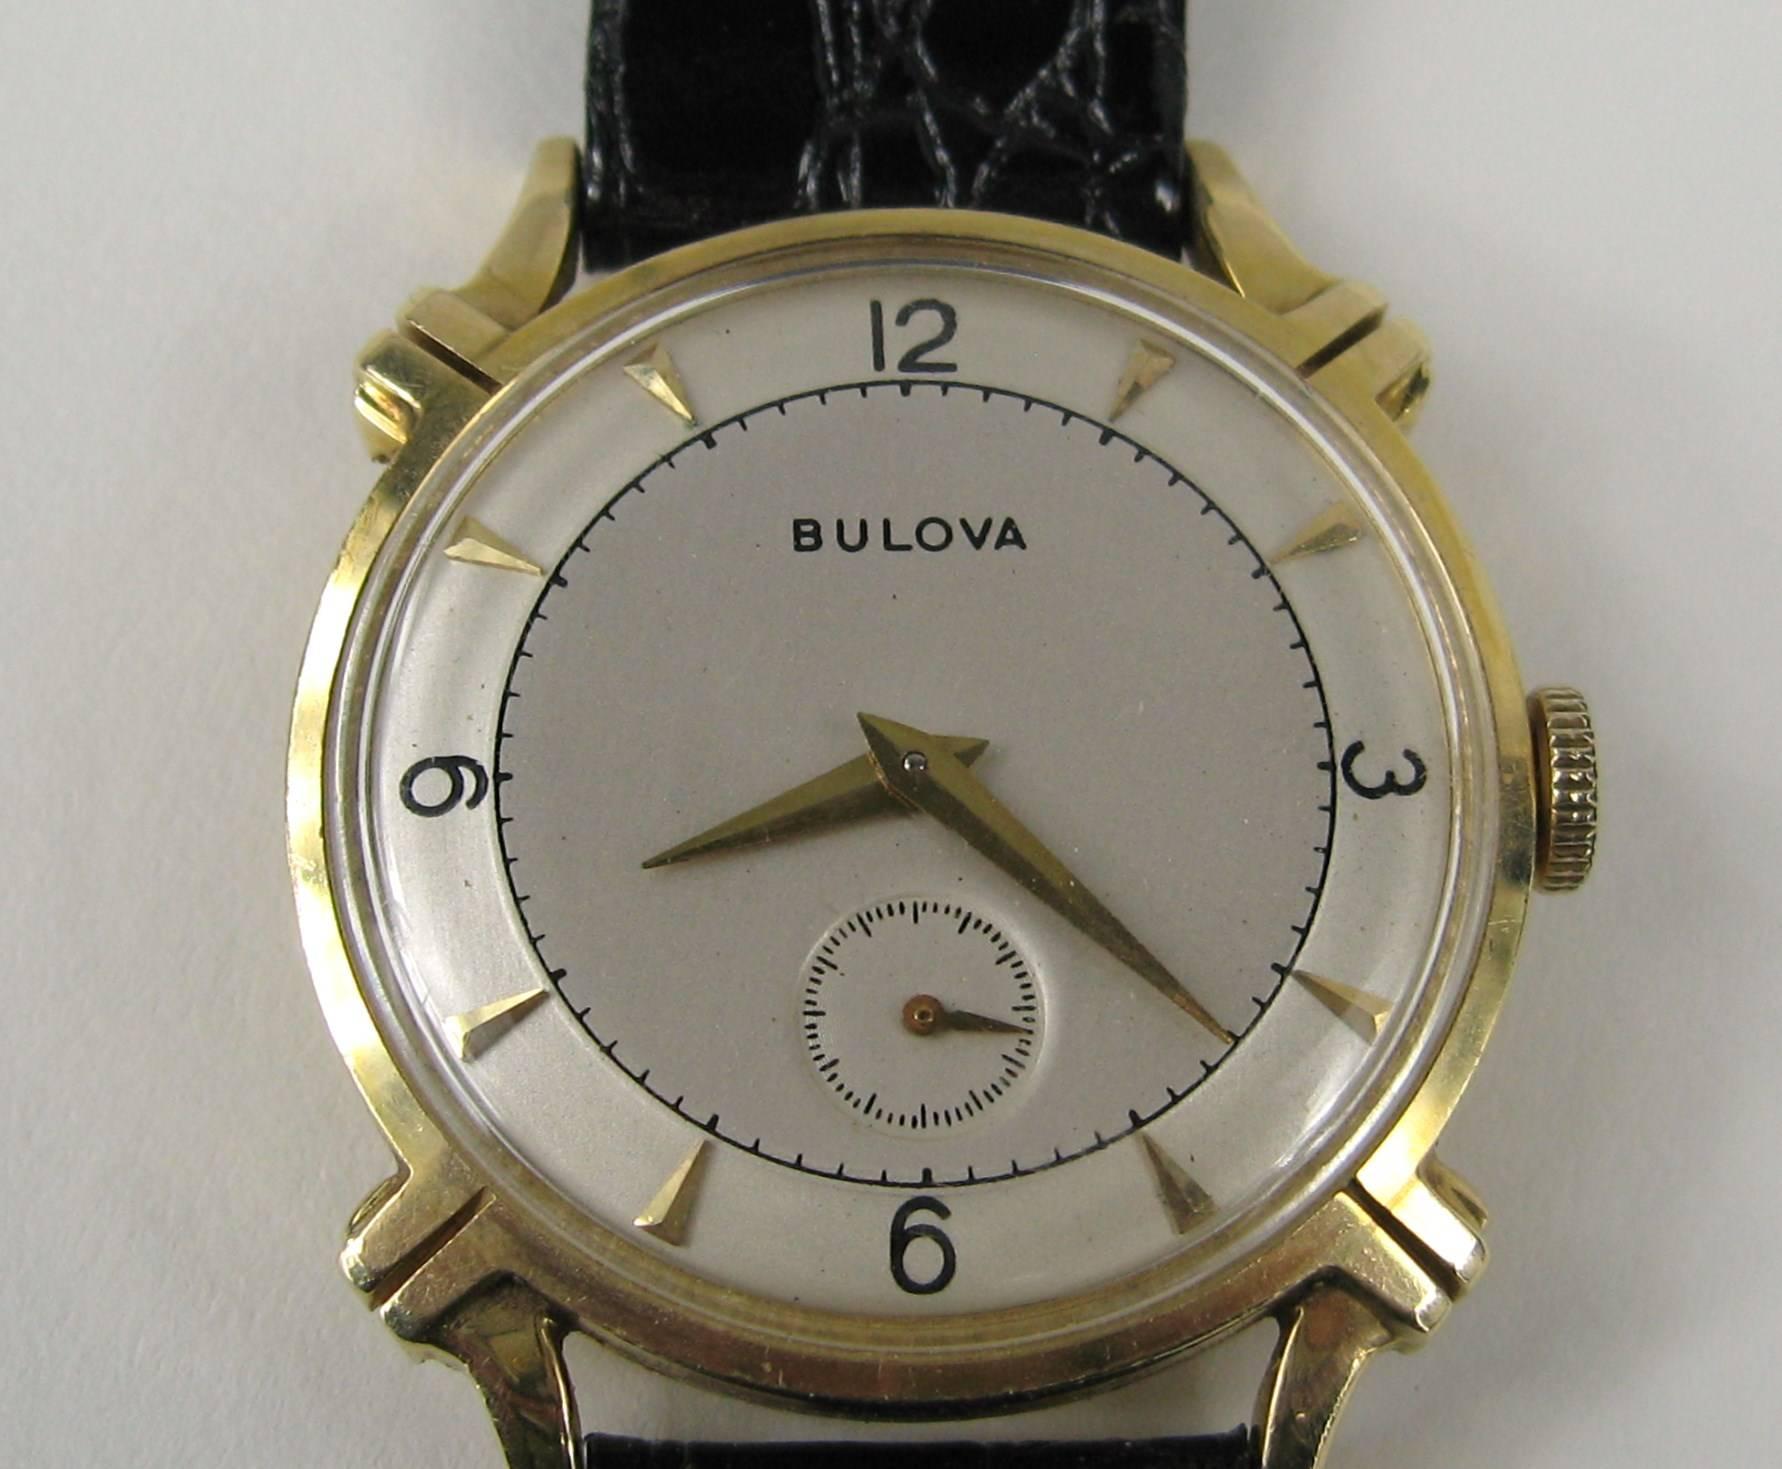 Stunning 14K gold Bulova Watch, this watch has had little use over it's years, Black Leather band. Measures Luge to Luge 38.6 mm or 1.5 in Width 31.97 mm or 1.26 in. It is In working order, Can be worn by a Man or Women. This is out of our massive